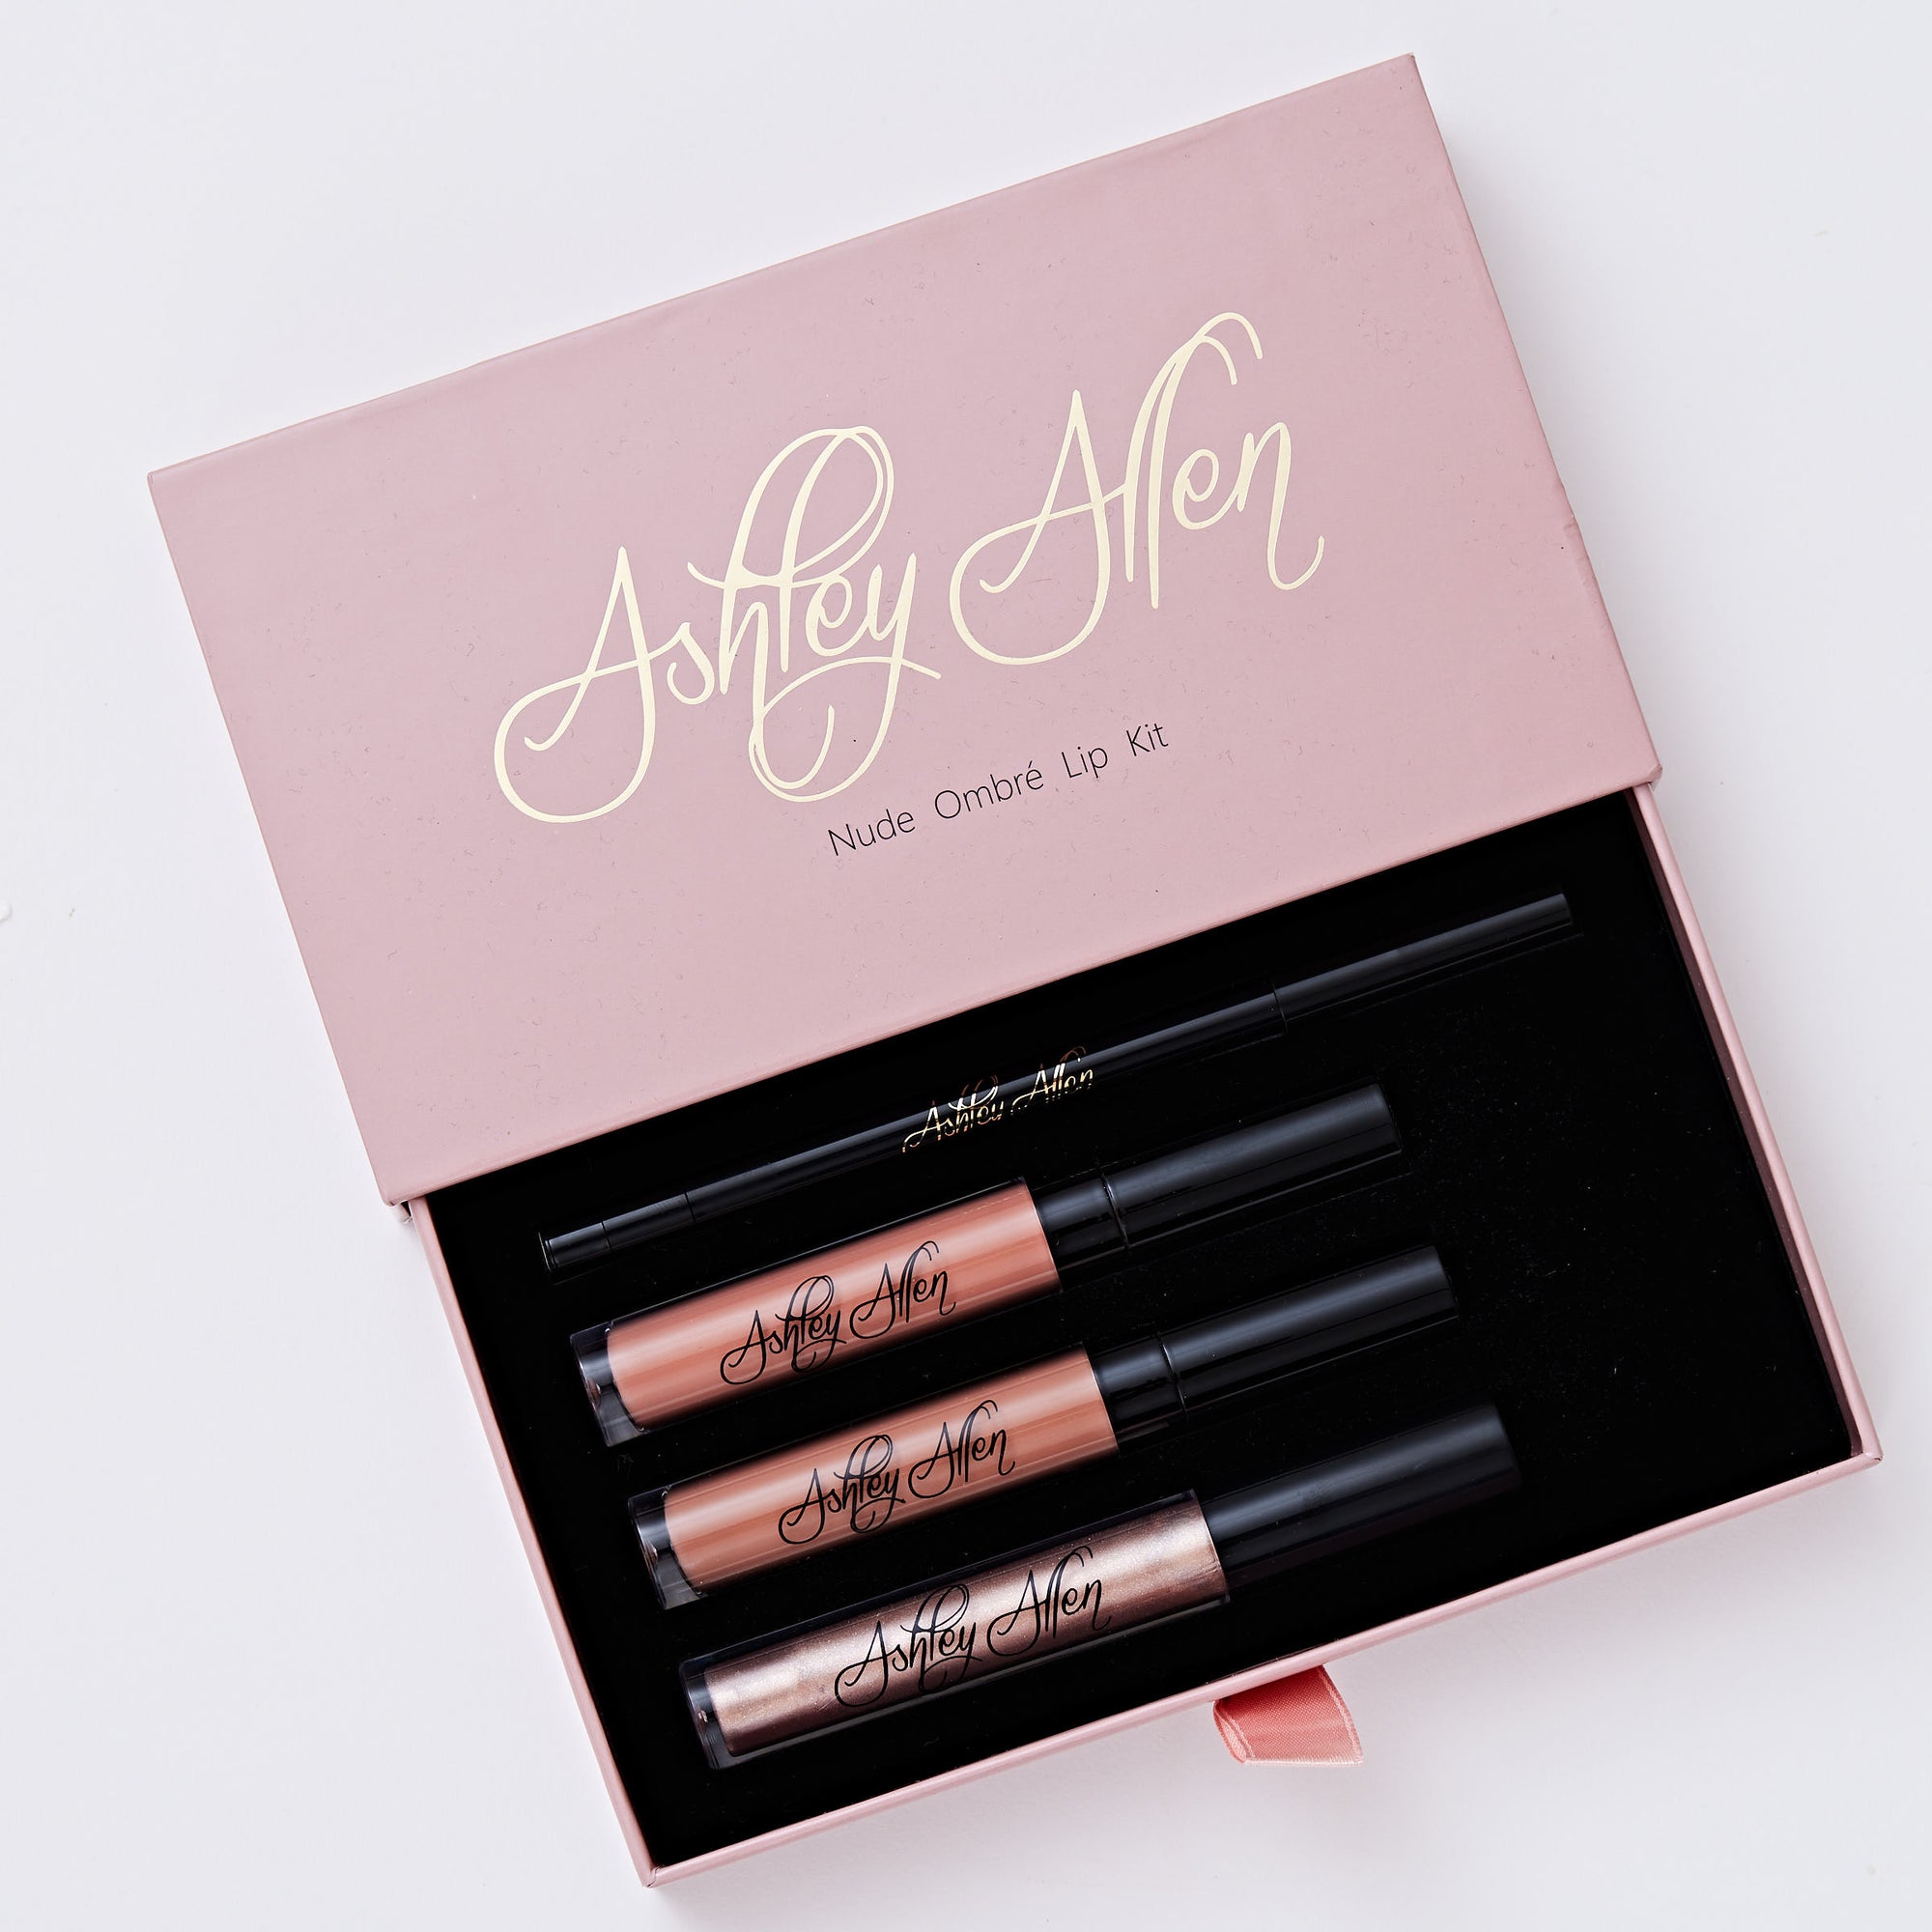 Lip Kit N4 (50% OFF) will be $40.00 Activated at checkouts